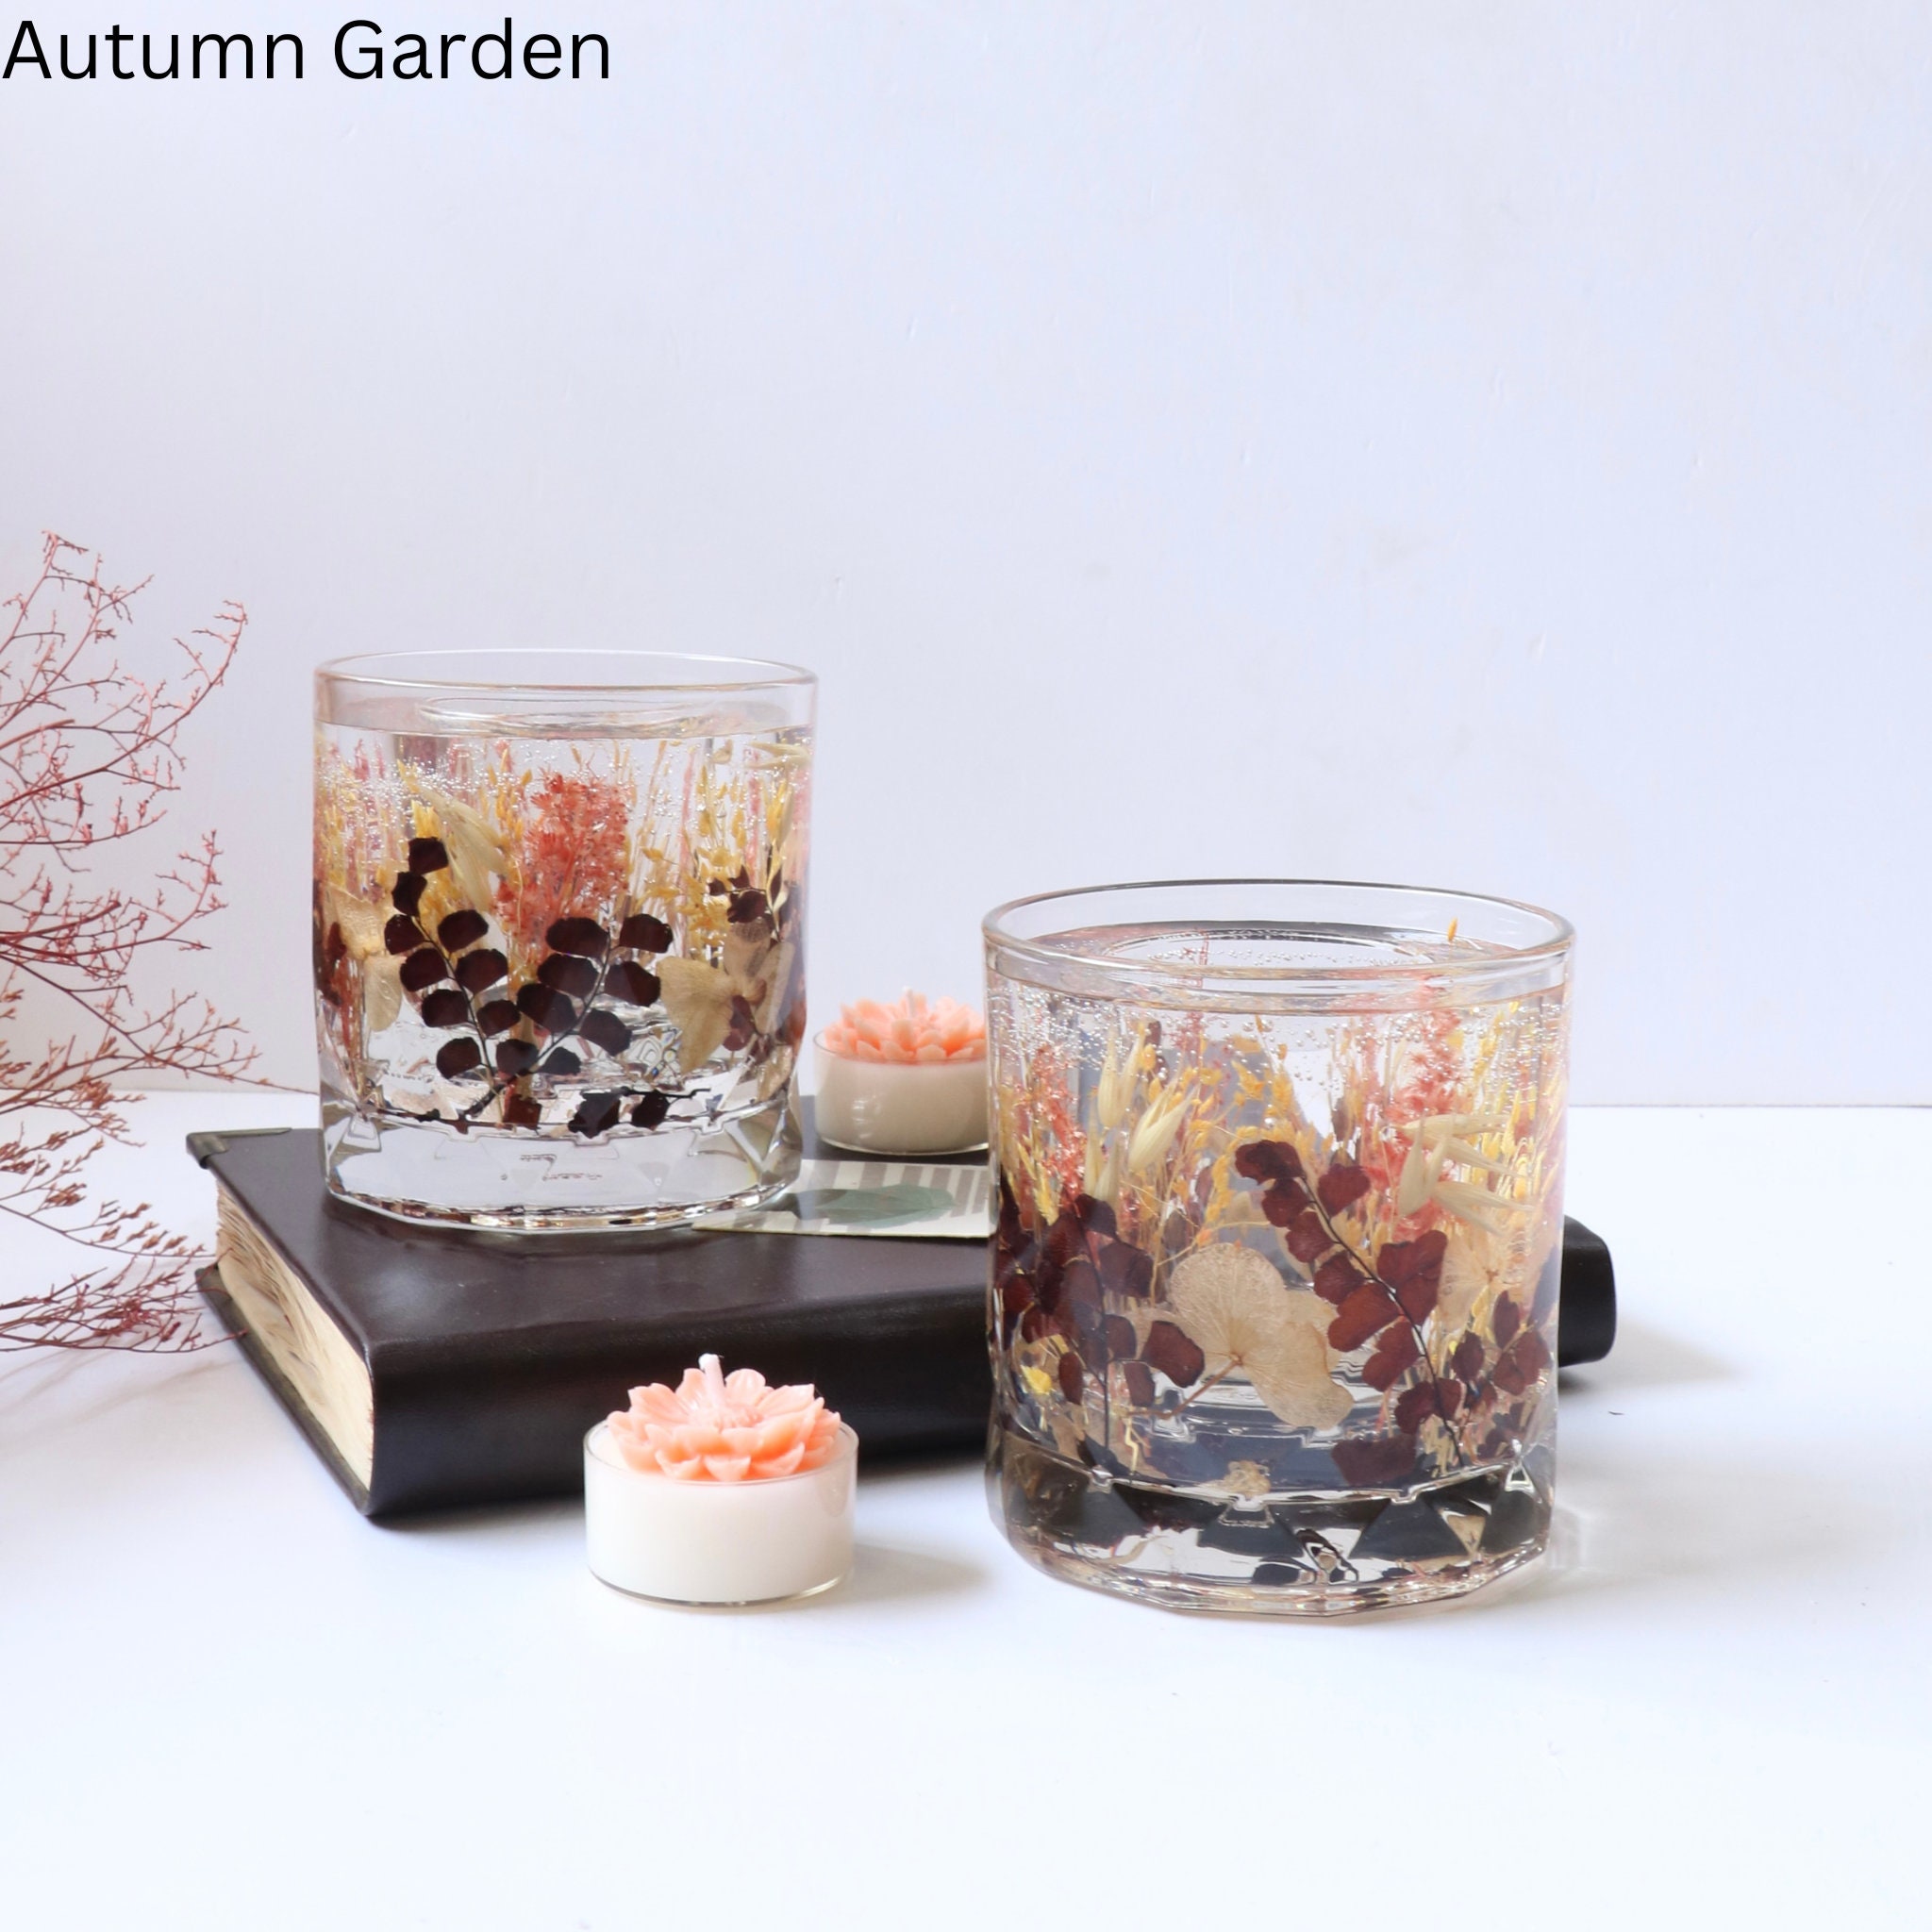 Decorating Candles with Dried Flowers: DIYs в журнале Ярмарки Мастеров